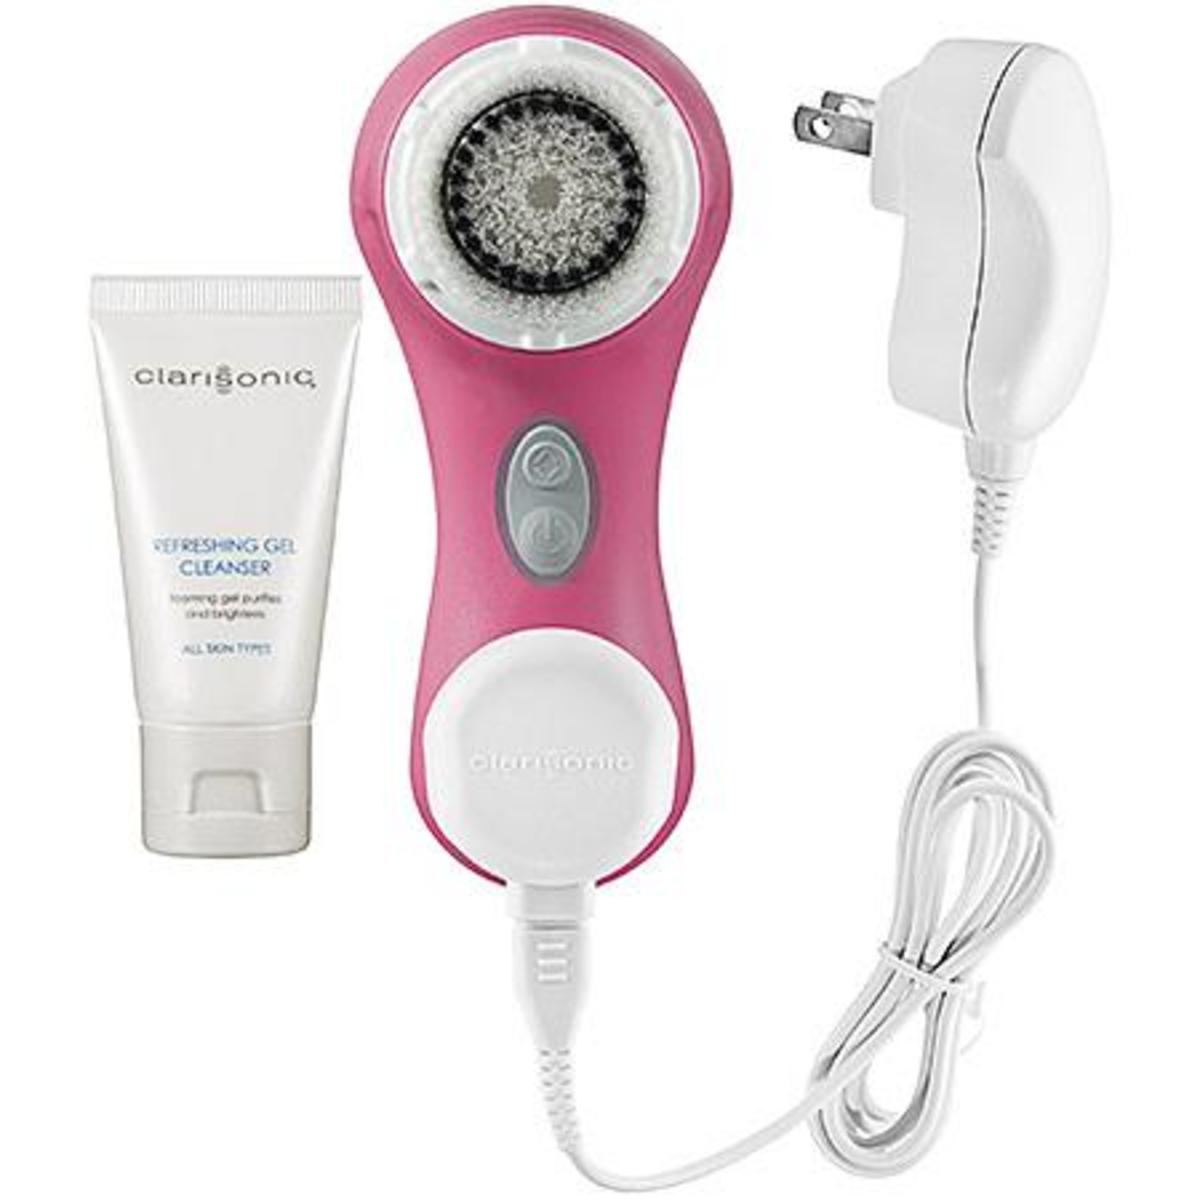 the Clarisonic Help Your Skin—Or Harm The Skincare Edit